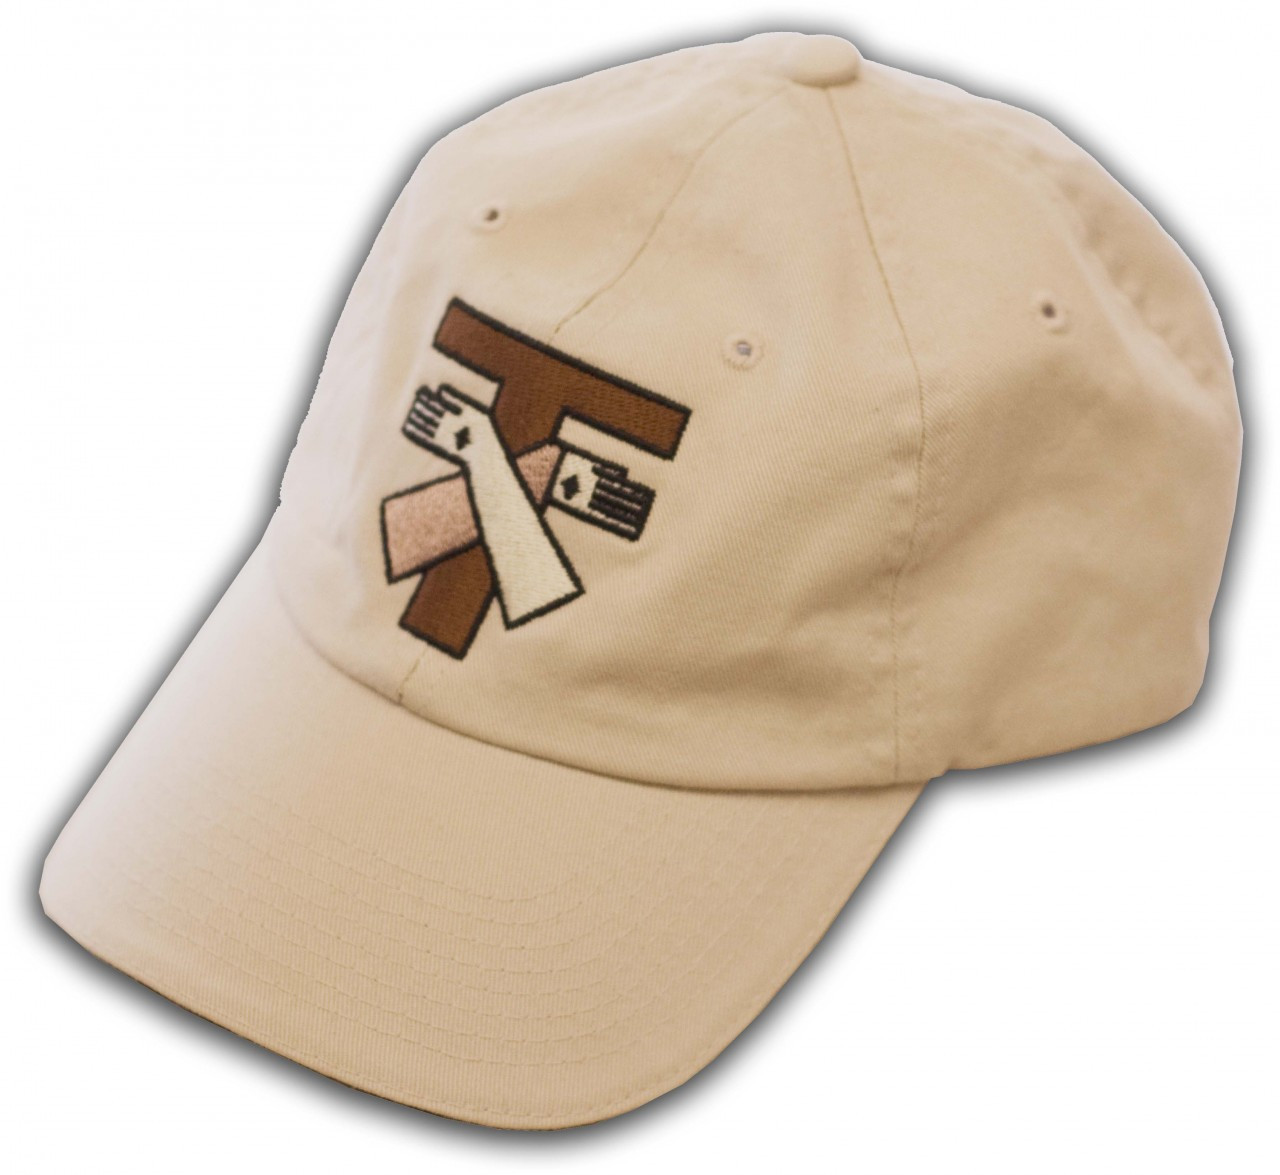 Jesus and St. Francis Tau Cross Hat